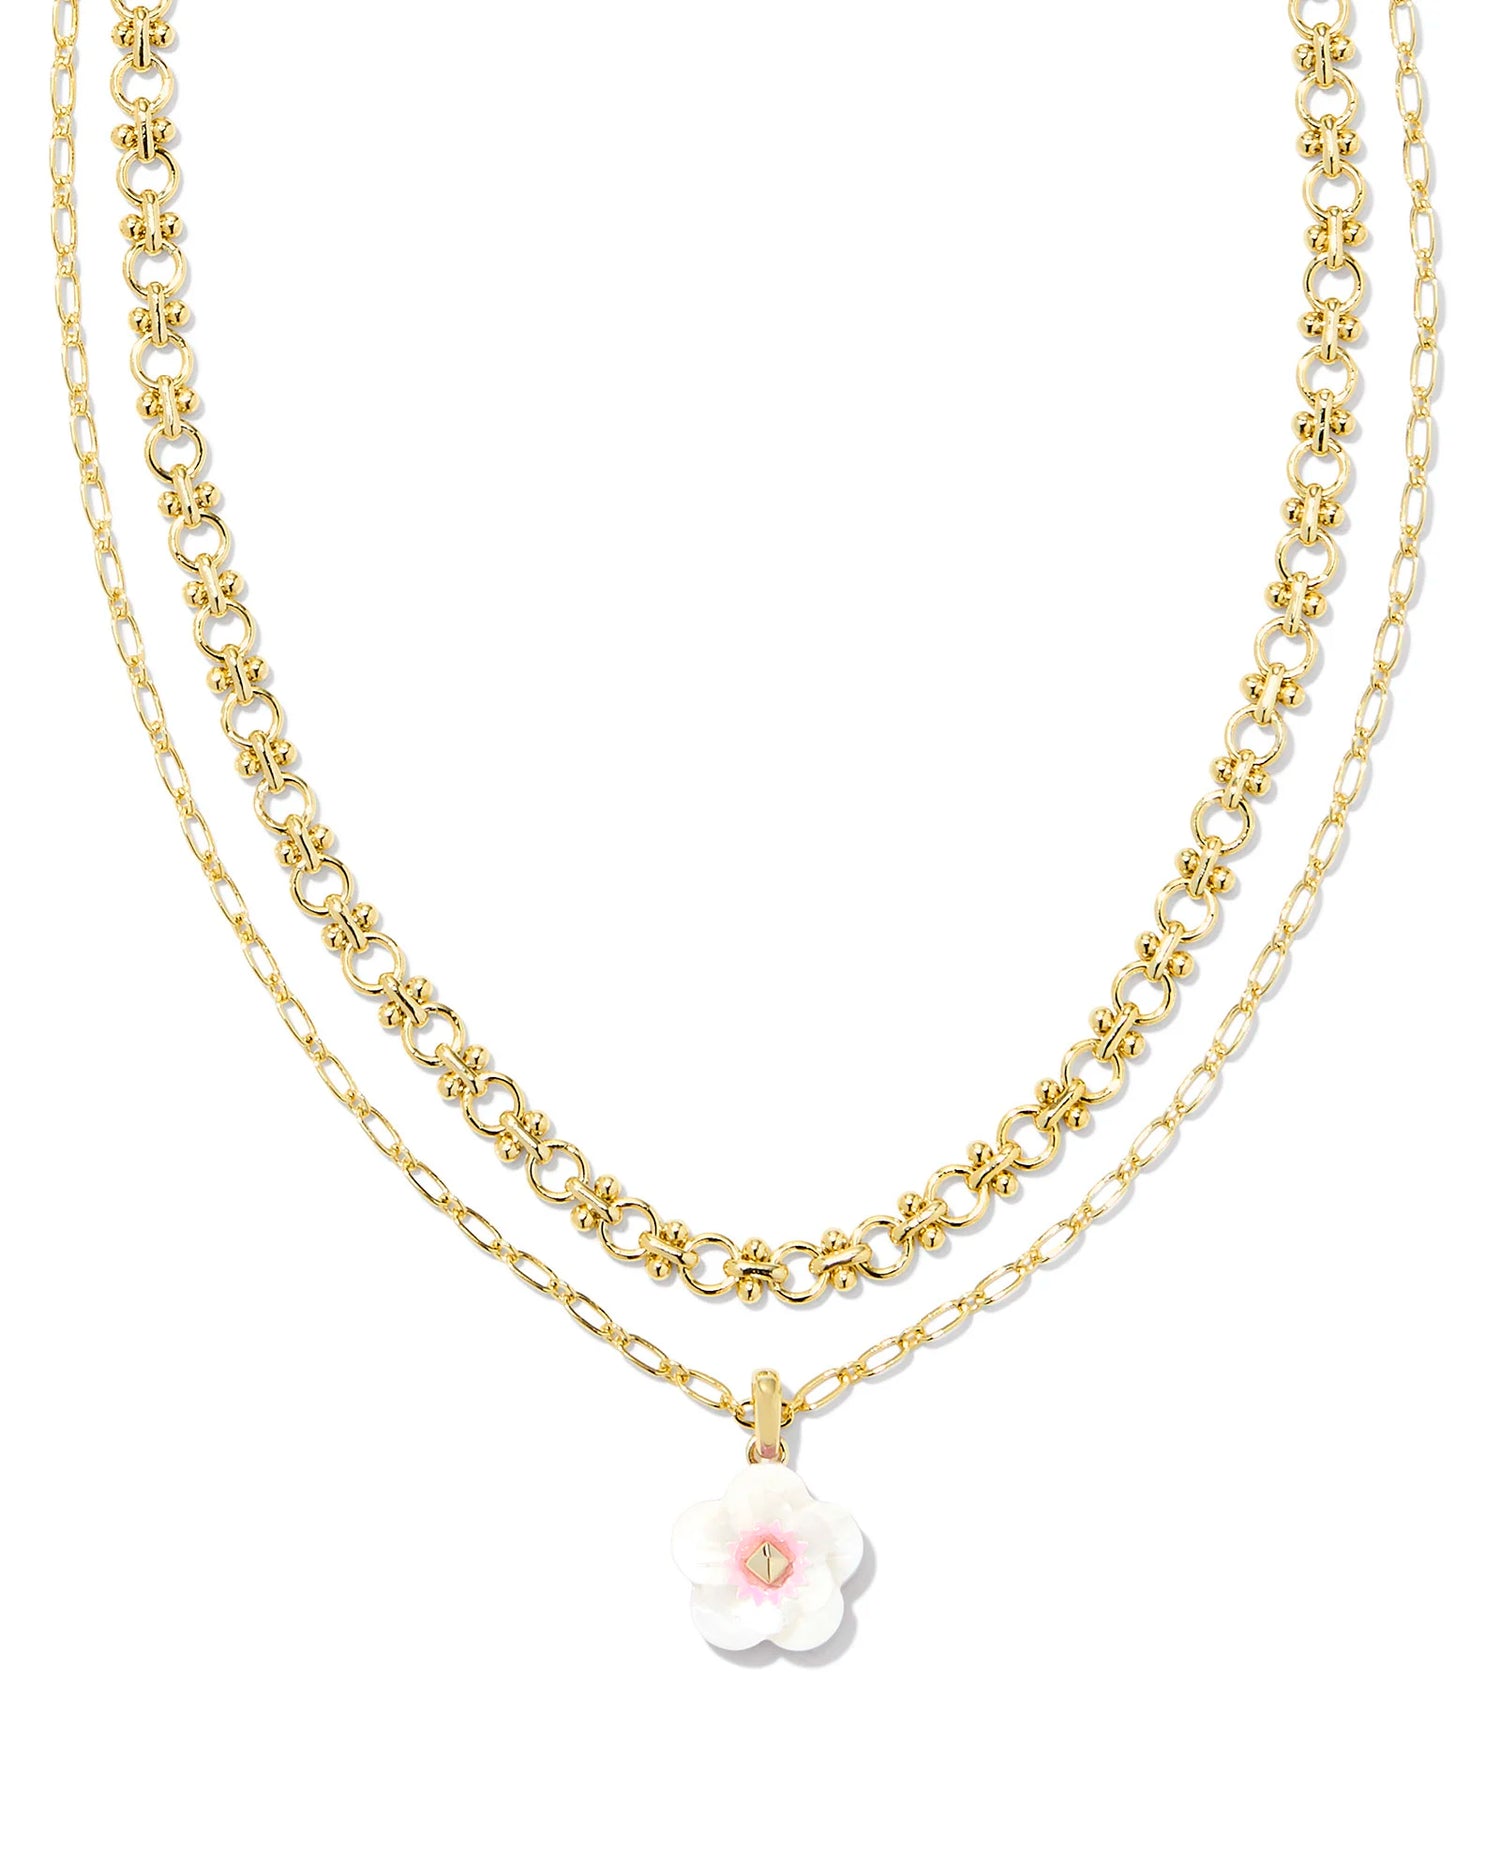 Metal14k Yellow Gold Over Brass MaterialIridescent Pink White Mix ClosureLobster Clasp Size16",16.5" Chains With 3" Extender, , 0.55"L X 0.54"W Pendant